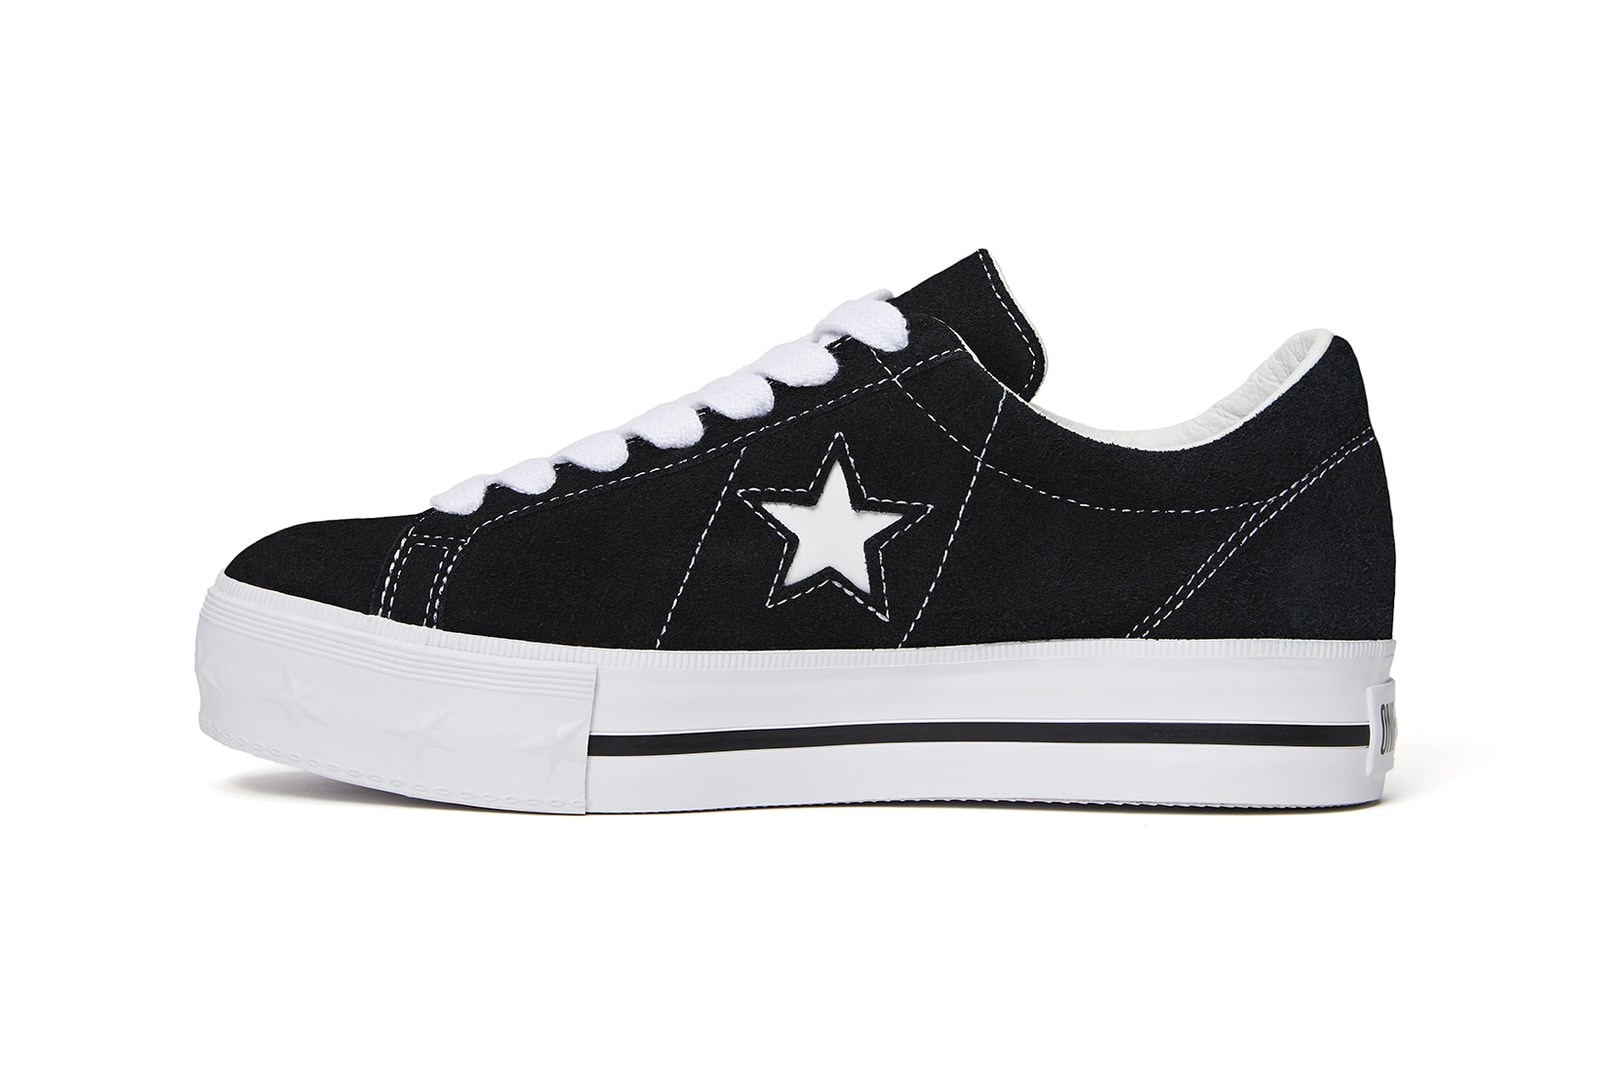 MadeMe Converse One Star Sneaker Apparel Collaboration Erin Magee Interview